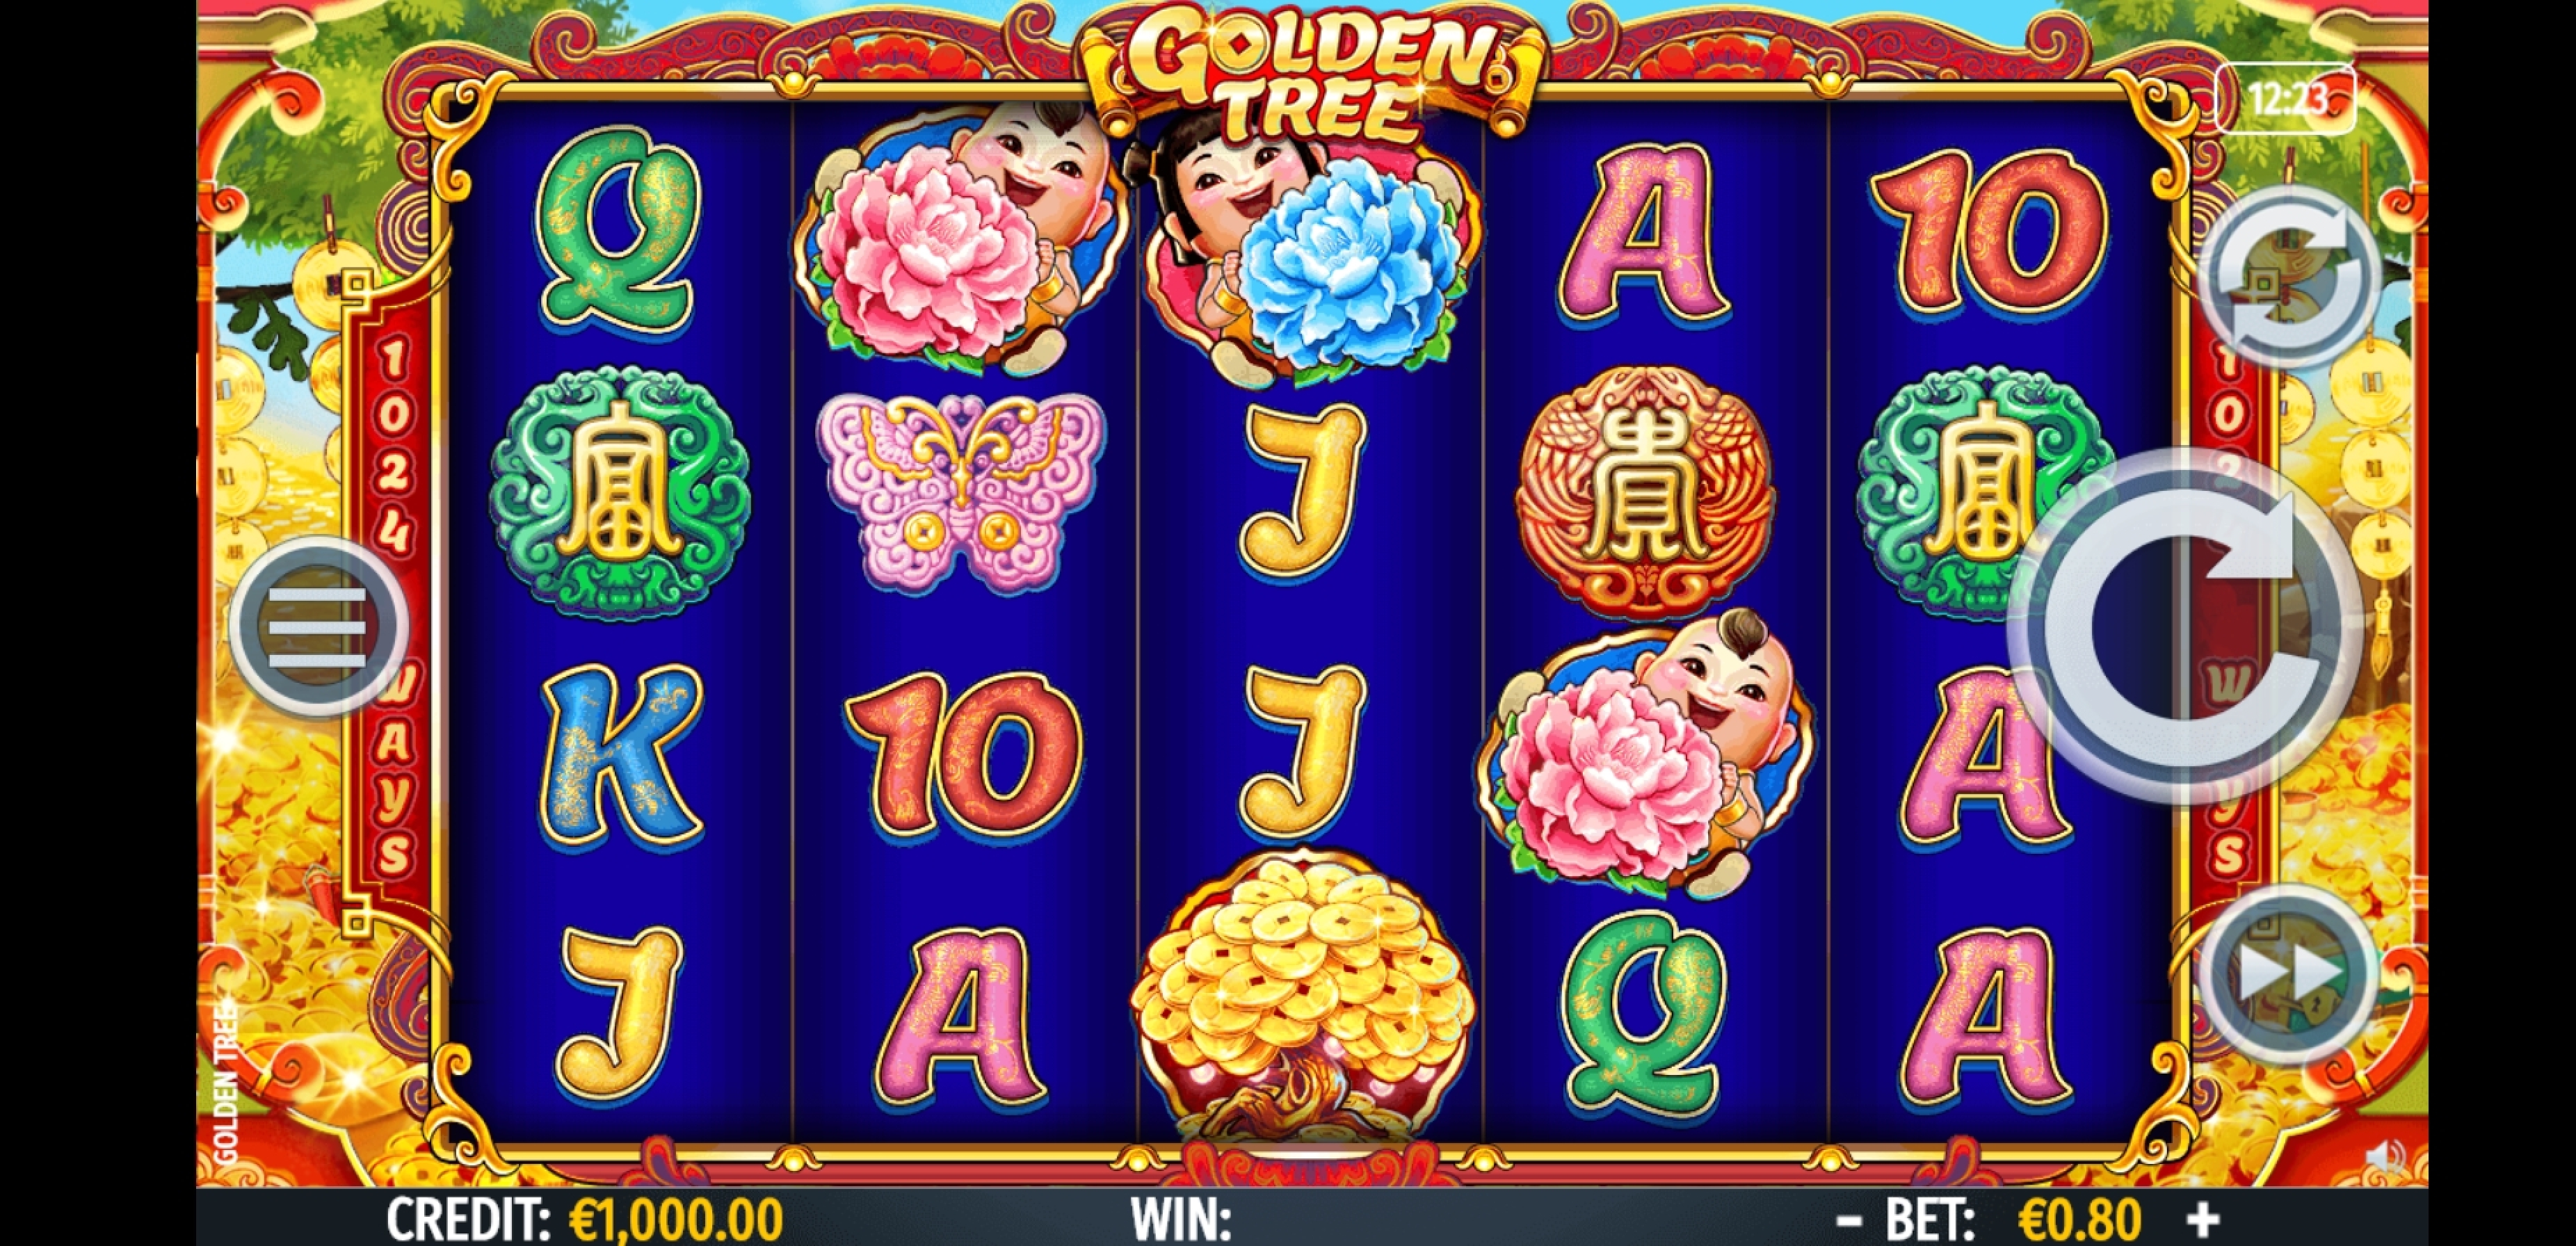 Golden Tree demo play, Slot Machine Online by Octavian Gaming Review